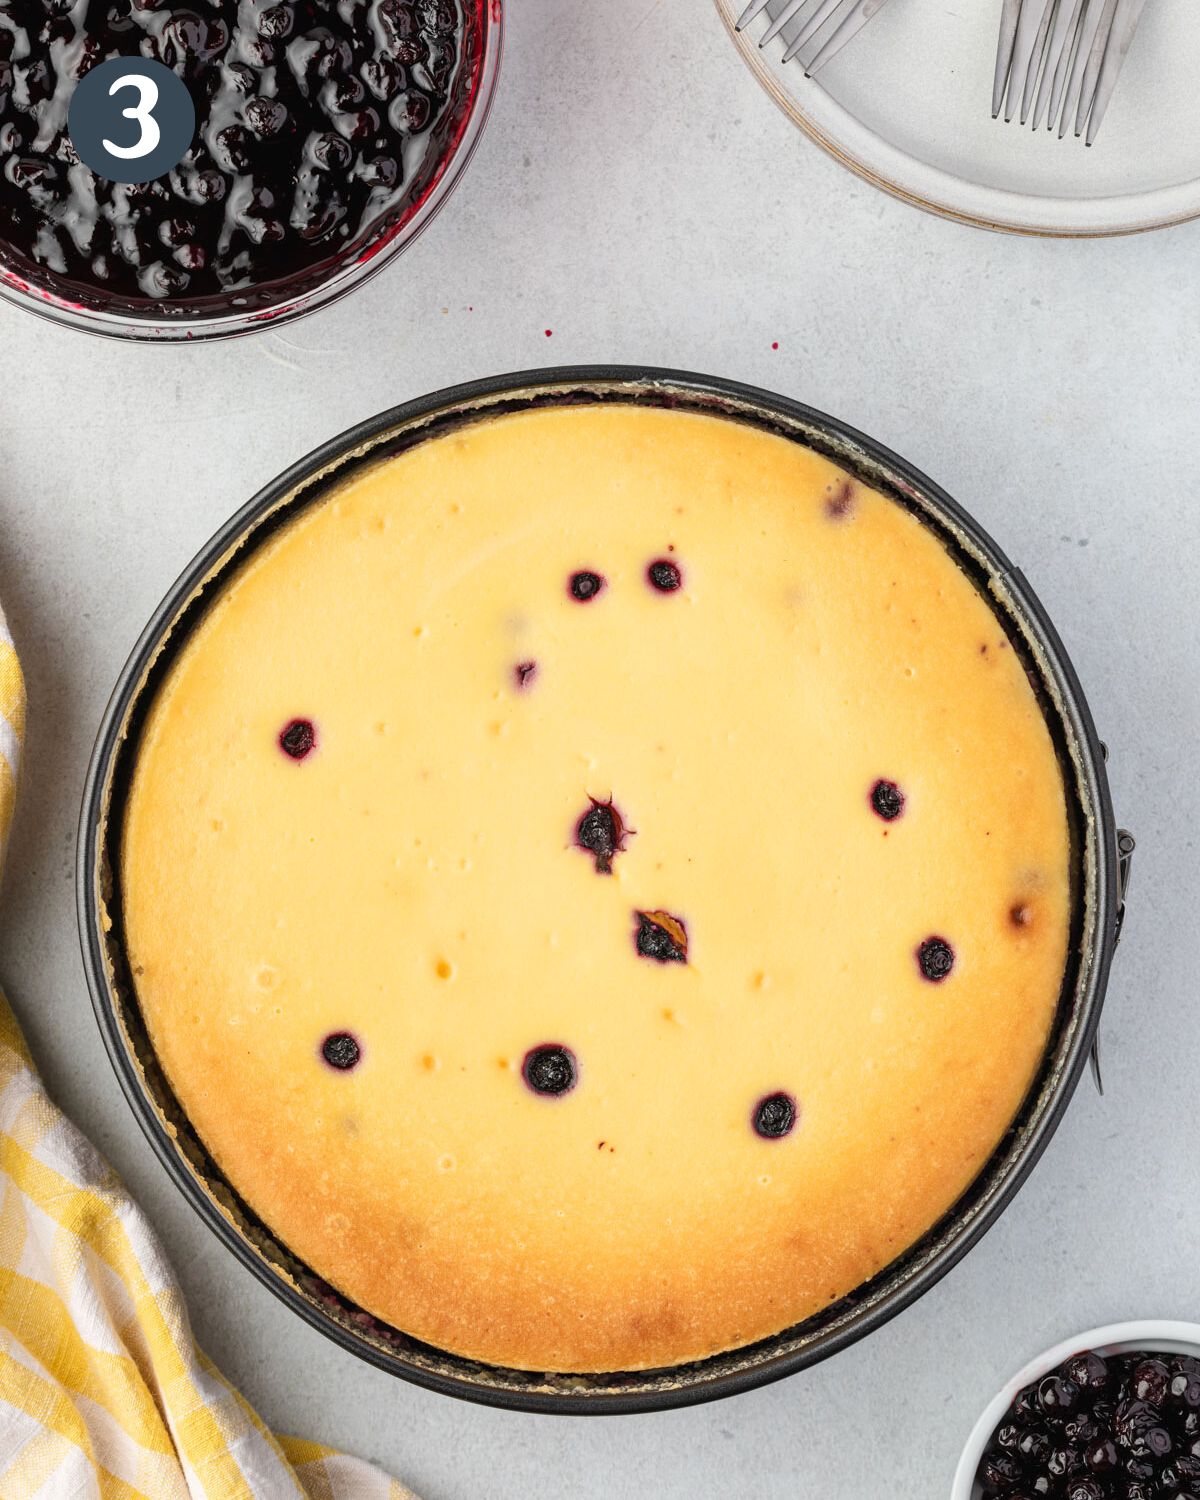 Baked cheesecake, golden brown edges with huckleberries showing.